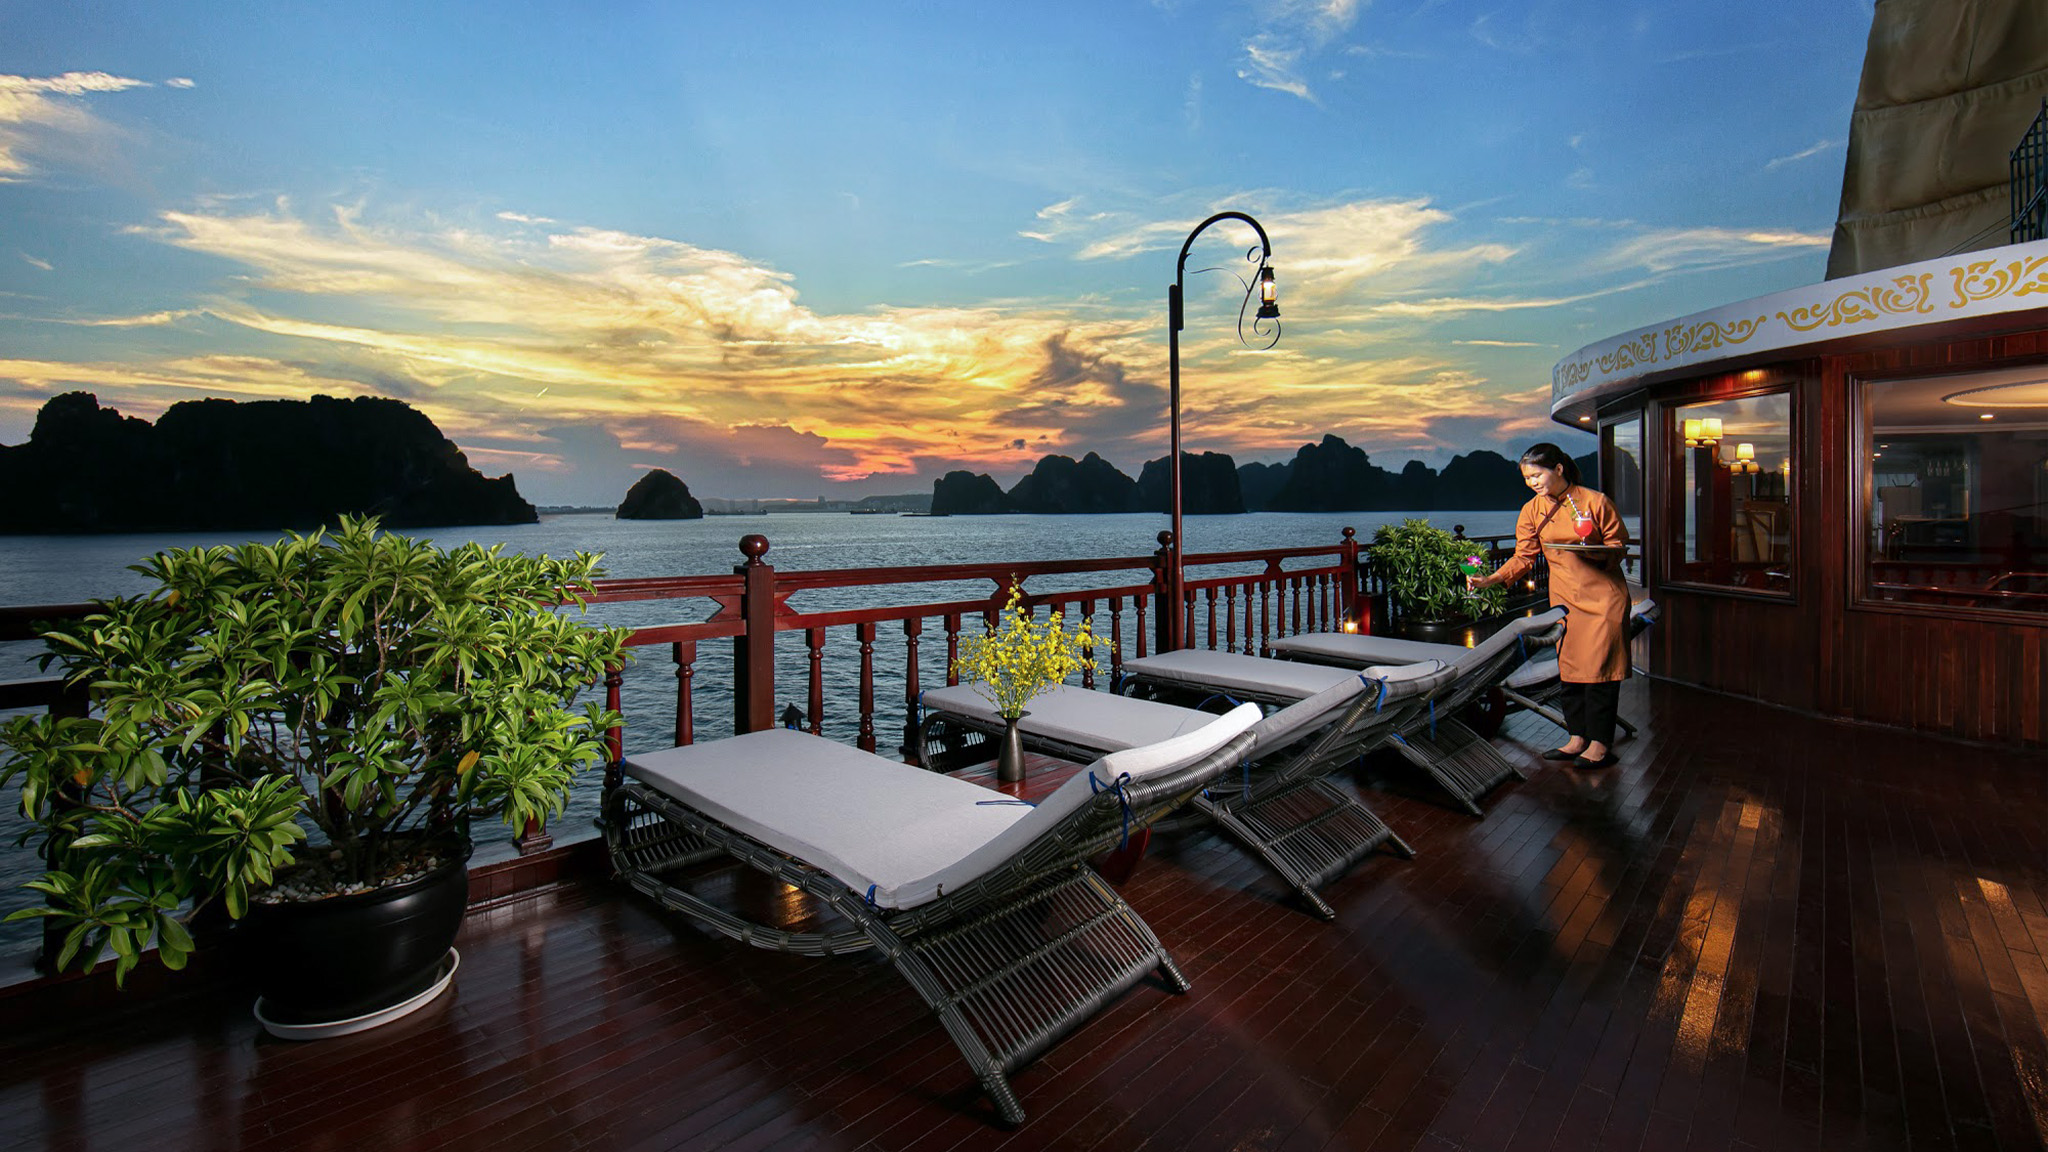 Admire the Lan Ha scenery on the sundeck